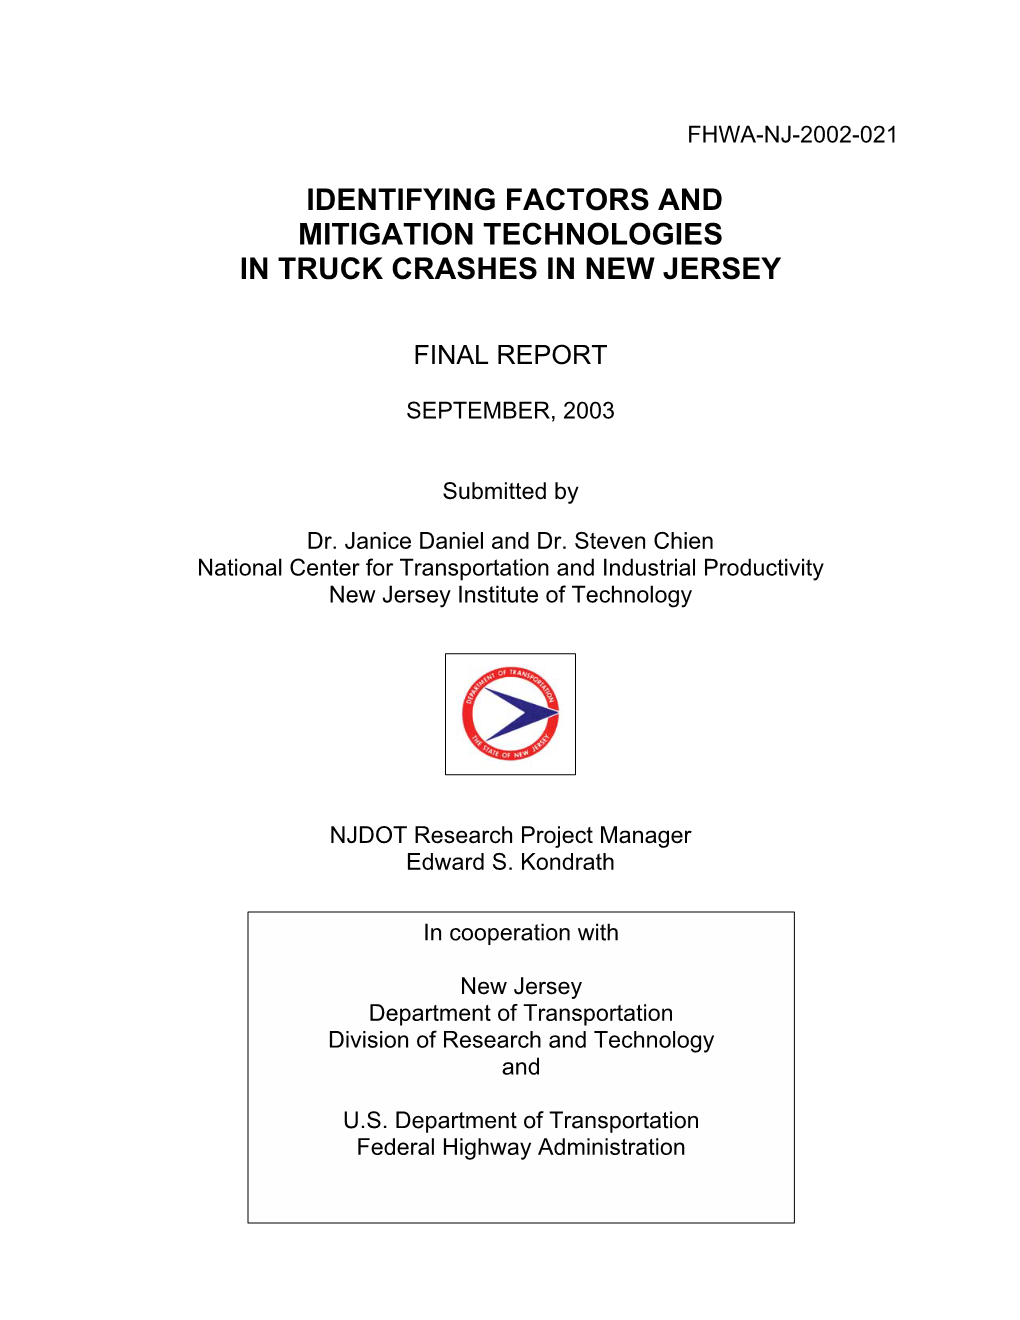 Identifying Factors and Mitigation Technologies in Truck Crashes in New Jersey